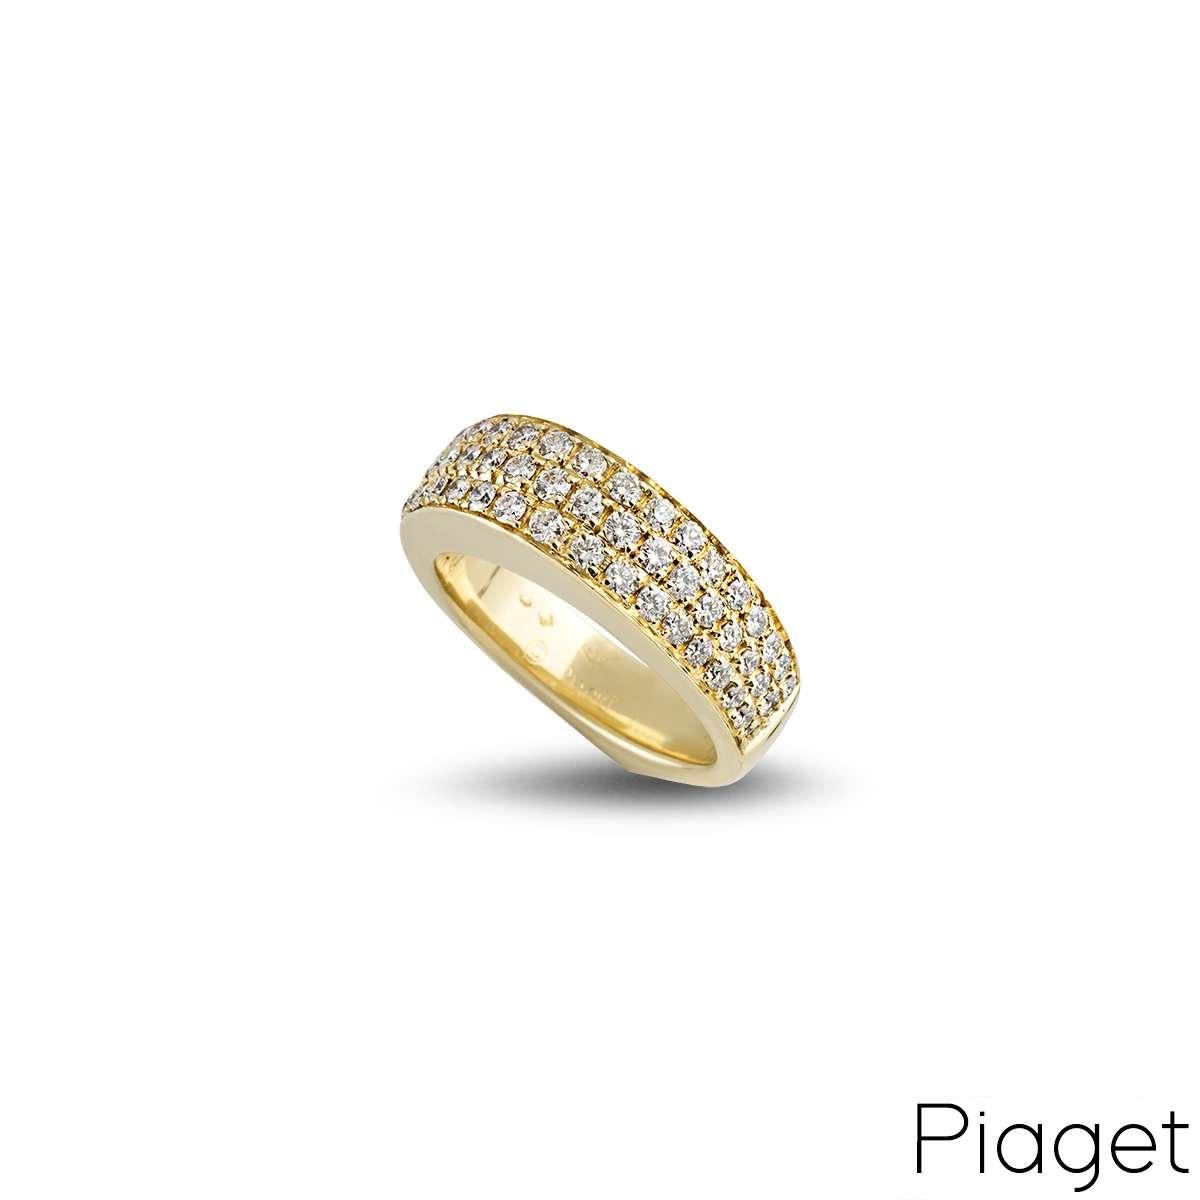 An 18k yellow gold diamond set folium shaped dress ring by Piaget. The ring is set to the front with 59 round brilliant cut diamonds along 3 horizontal rows, totalling approximately 1.50ct. The ring is domed at the front and pointed at the back and